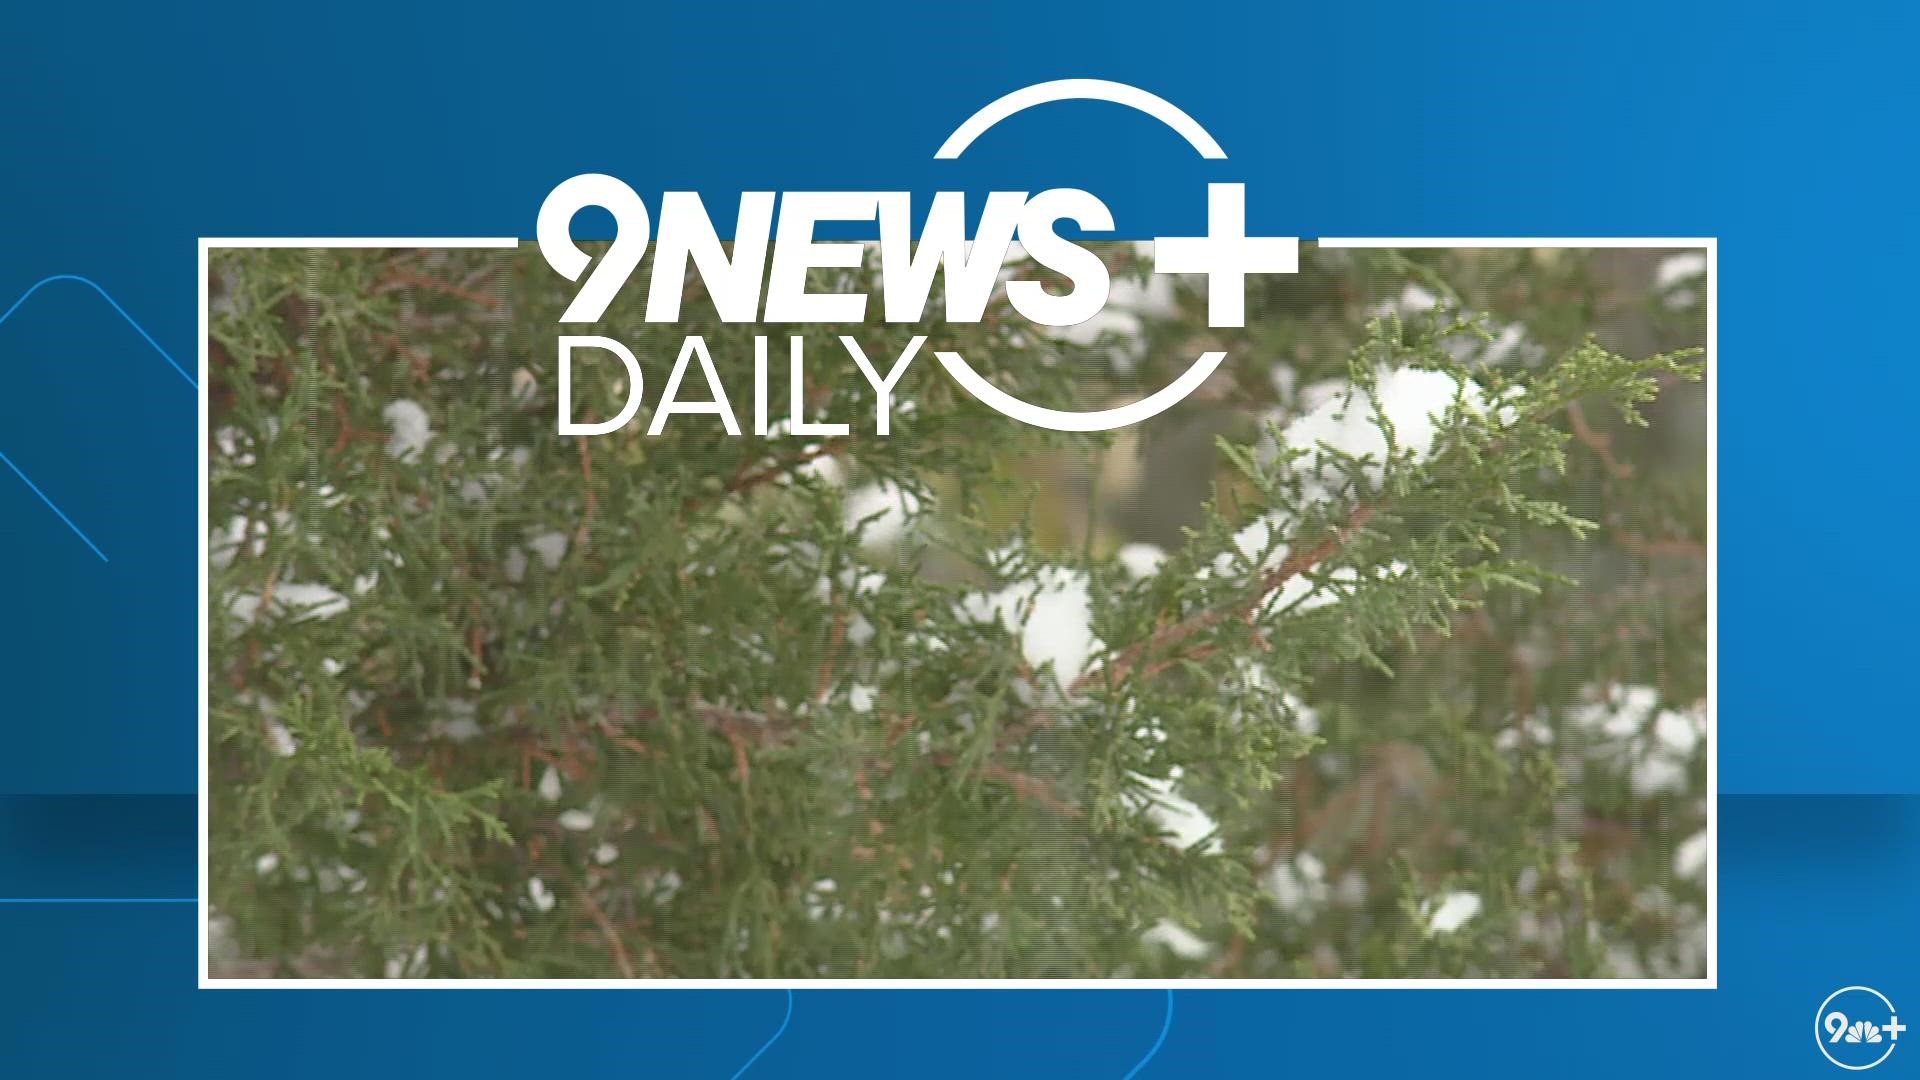 Meteorologists Chris Bianchi and Cory Reppenhagen share their snow forecast predictions for the winter season in Colorado.